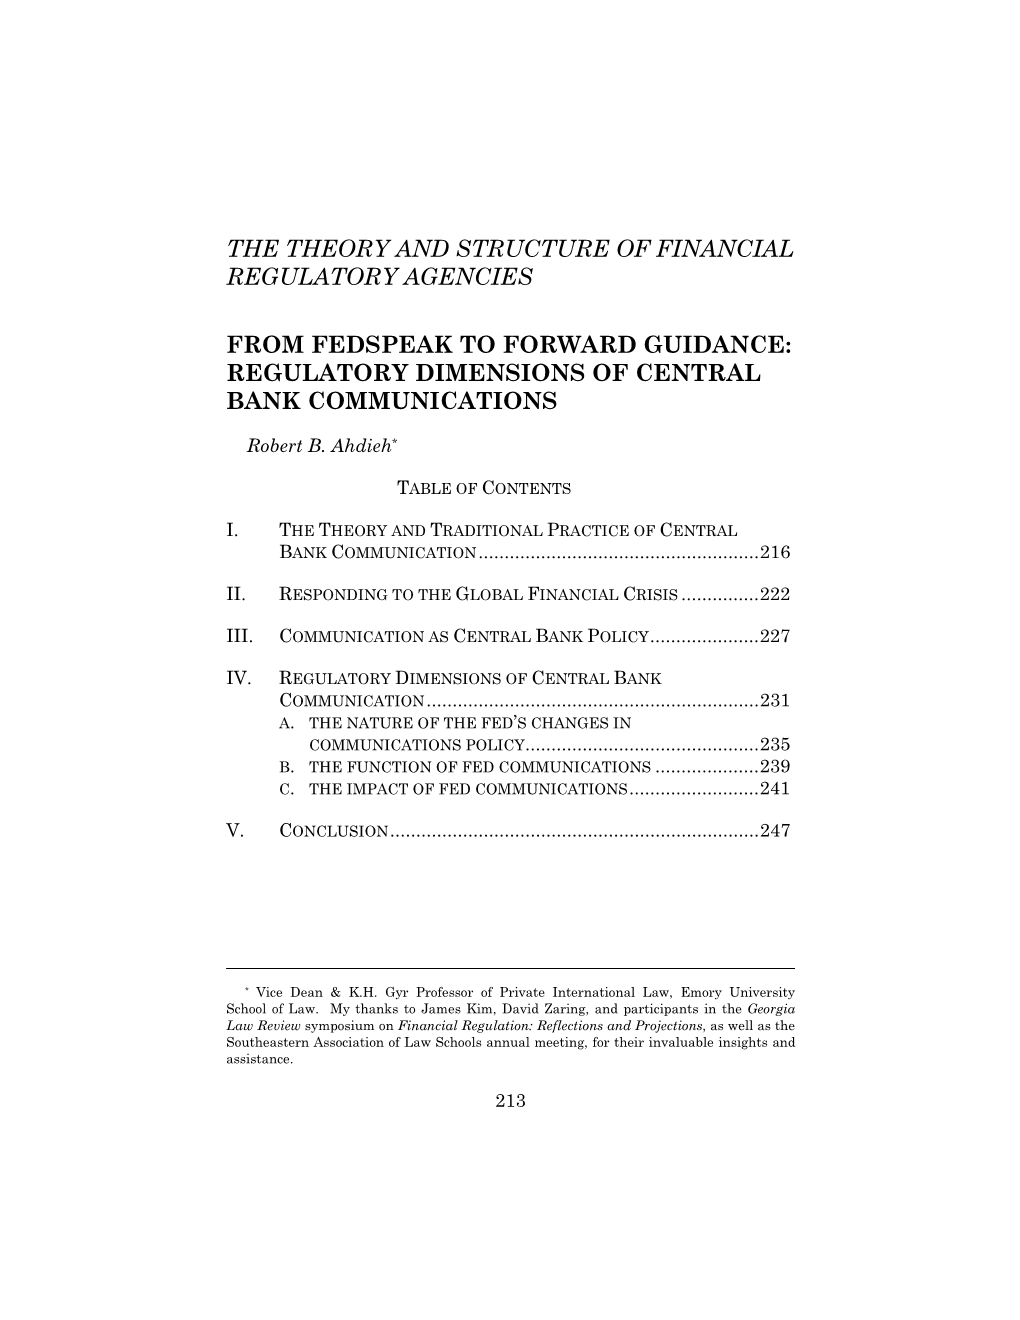 The Theory and Structure of Financial Regulatory Agencies